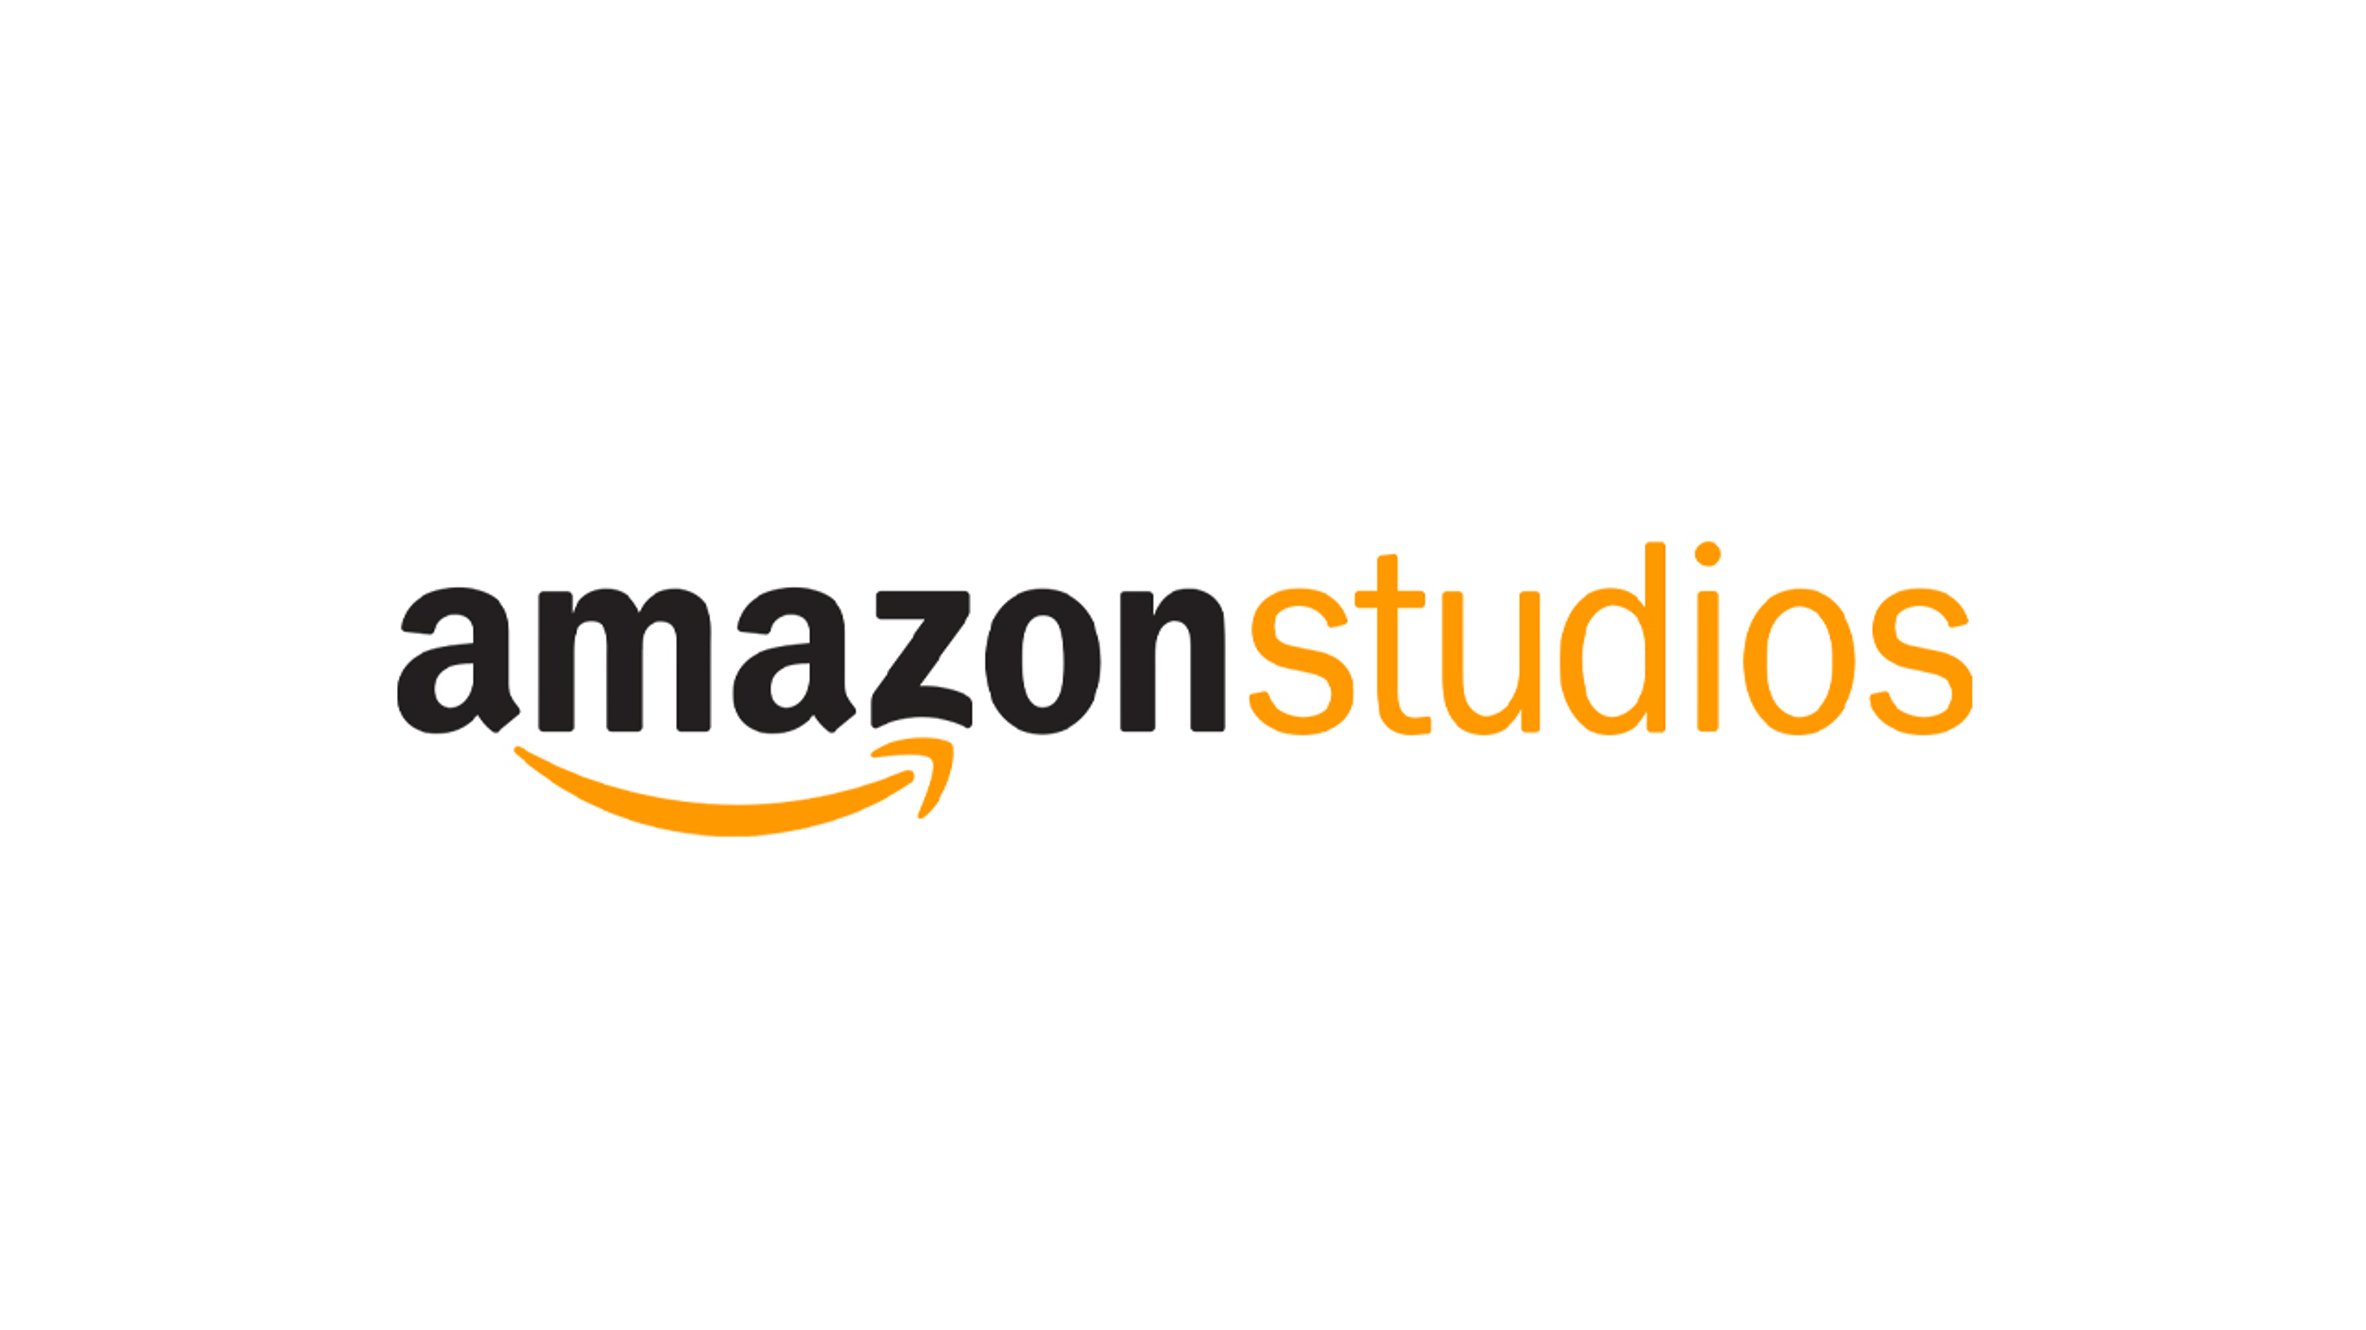 Amazon Web Series Casting for a Lead Role